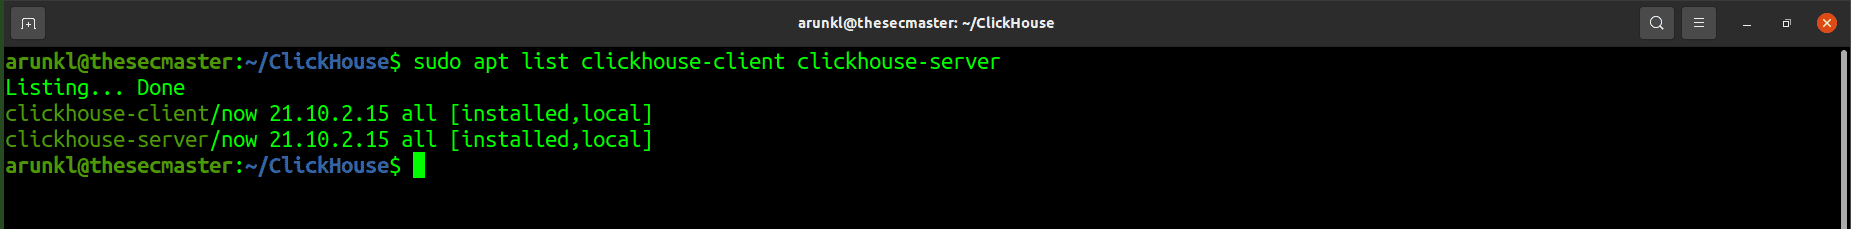 Check The Version Of The Clickhouse After Upgrade